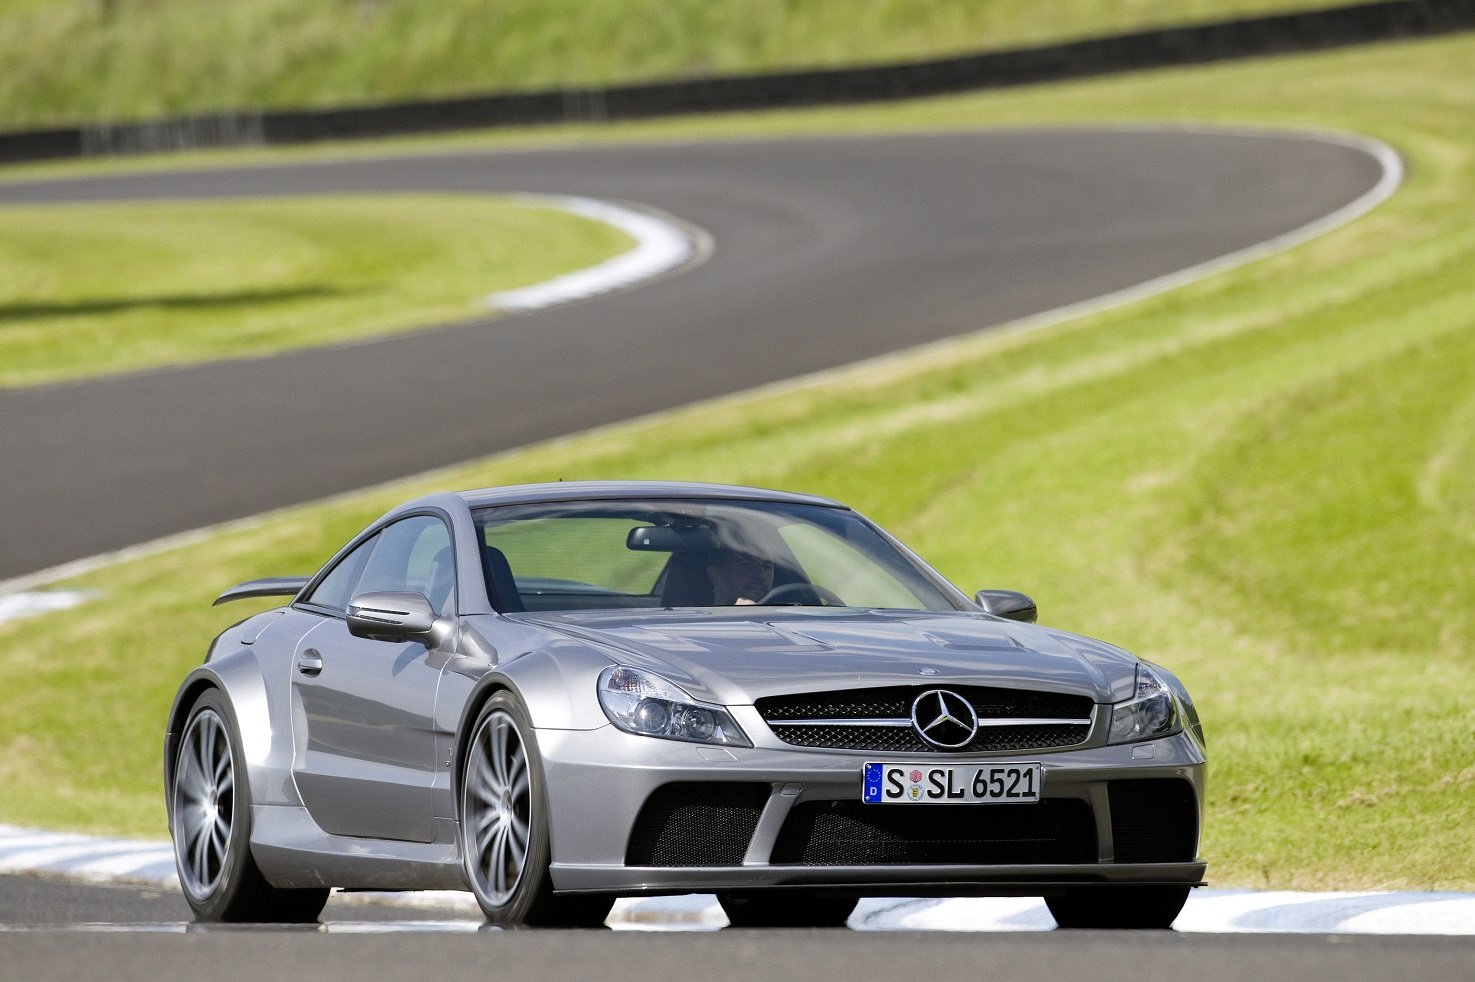 mercedes, Benz, Sl65, Amg, Black, Series,  r230 , Cars, Coupe, Silver, 2008 Wallpaper